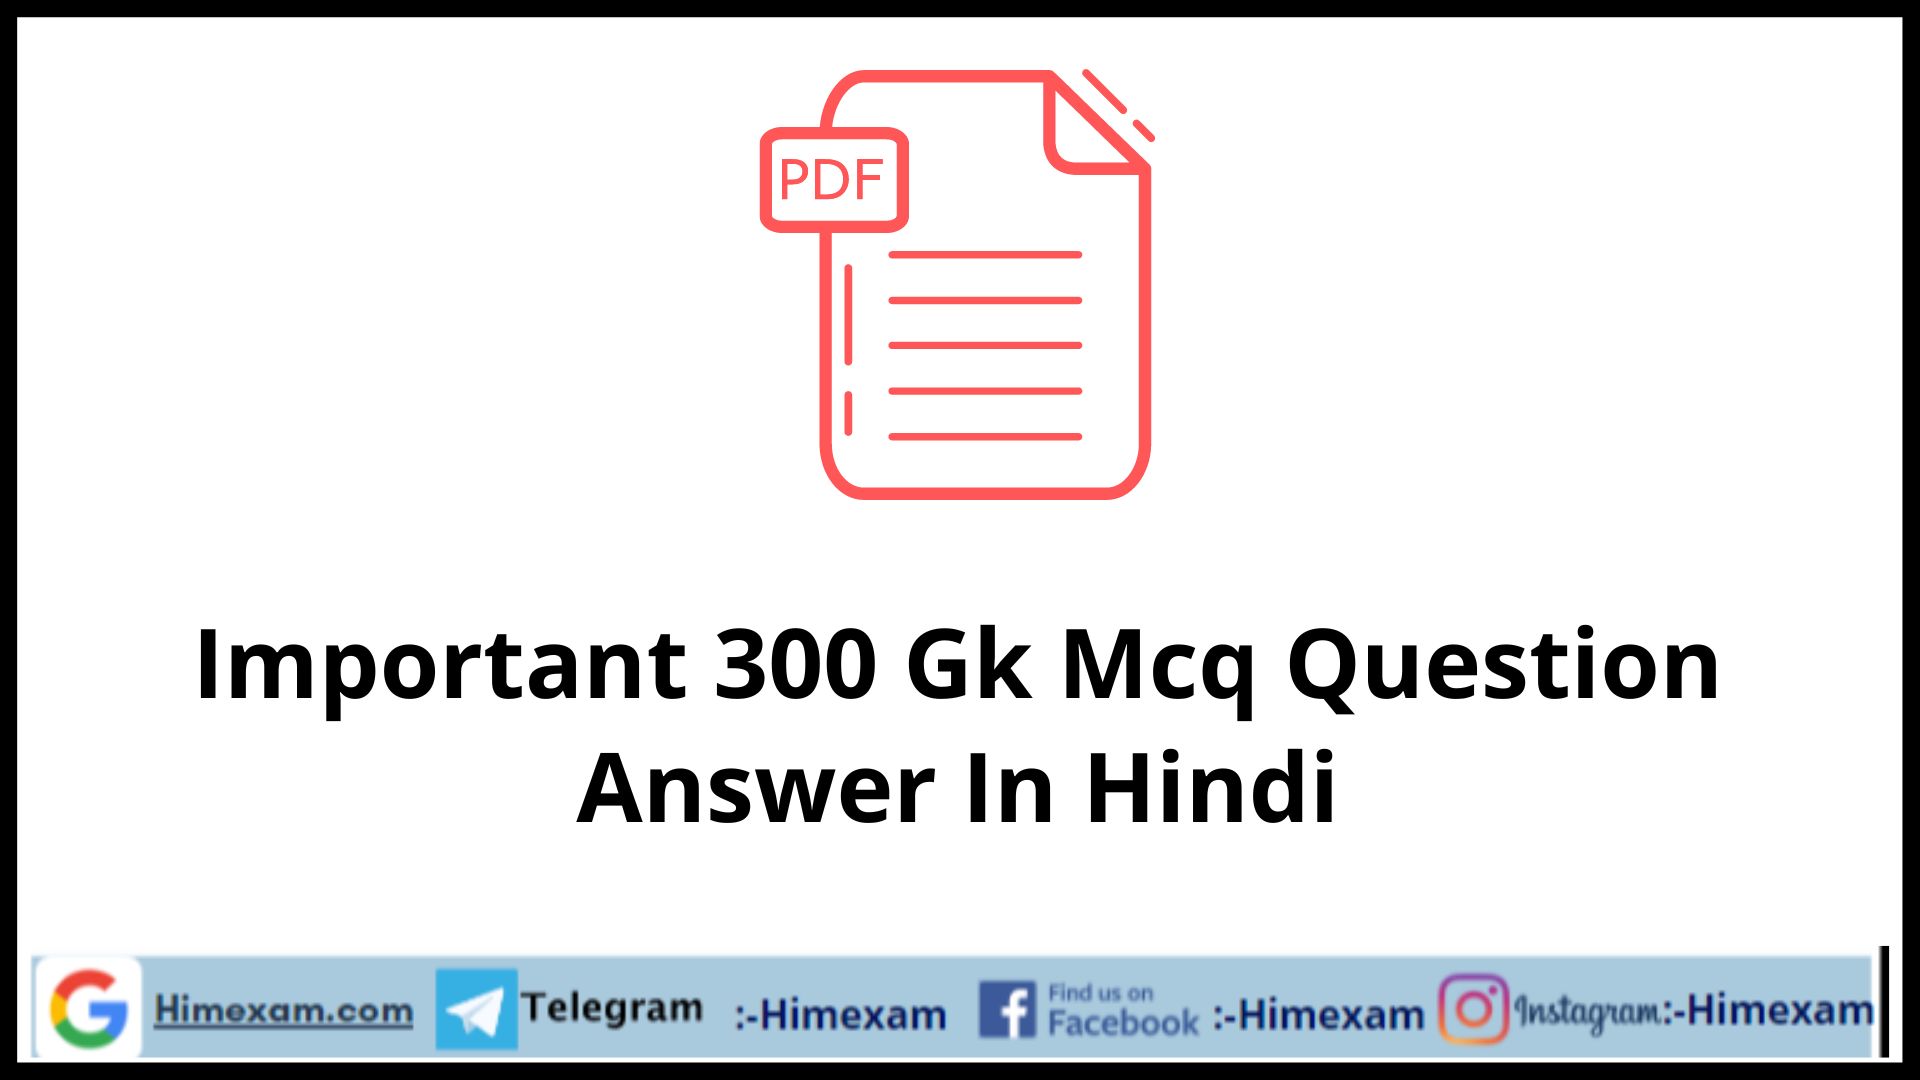 Important 300 Gk Mcq Question Answer In Hindi